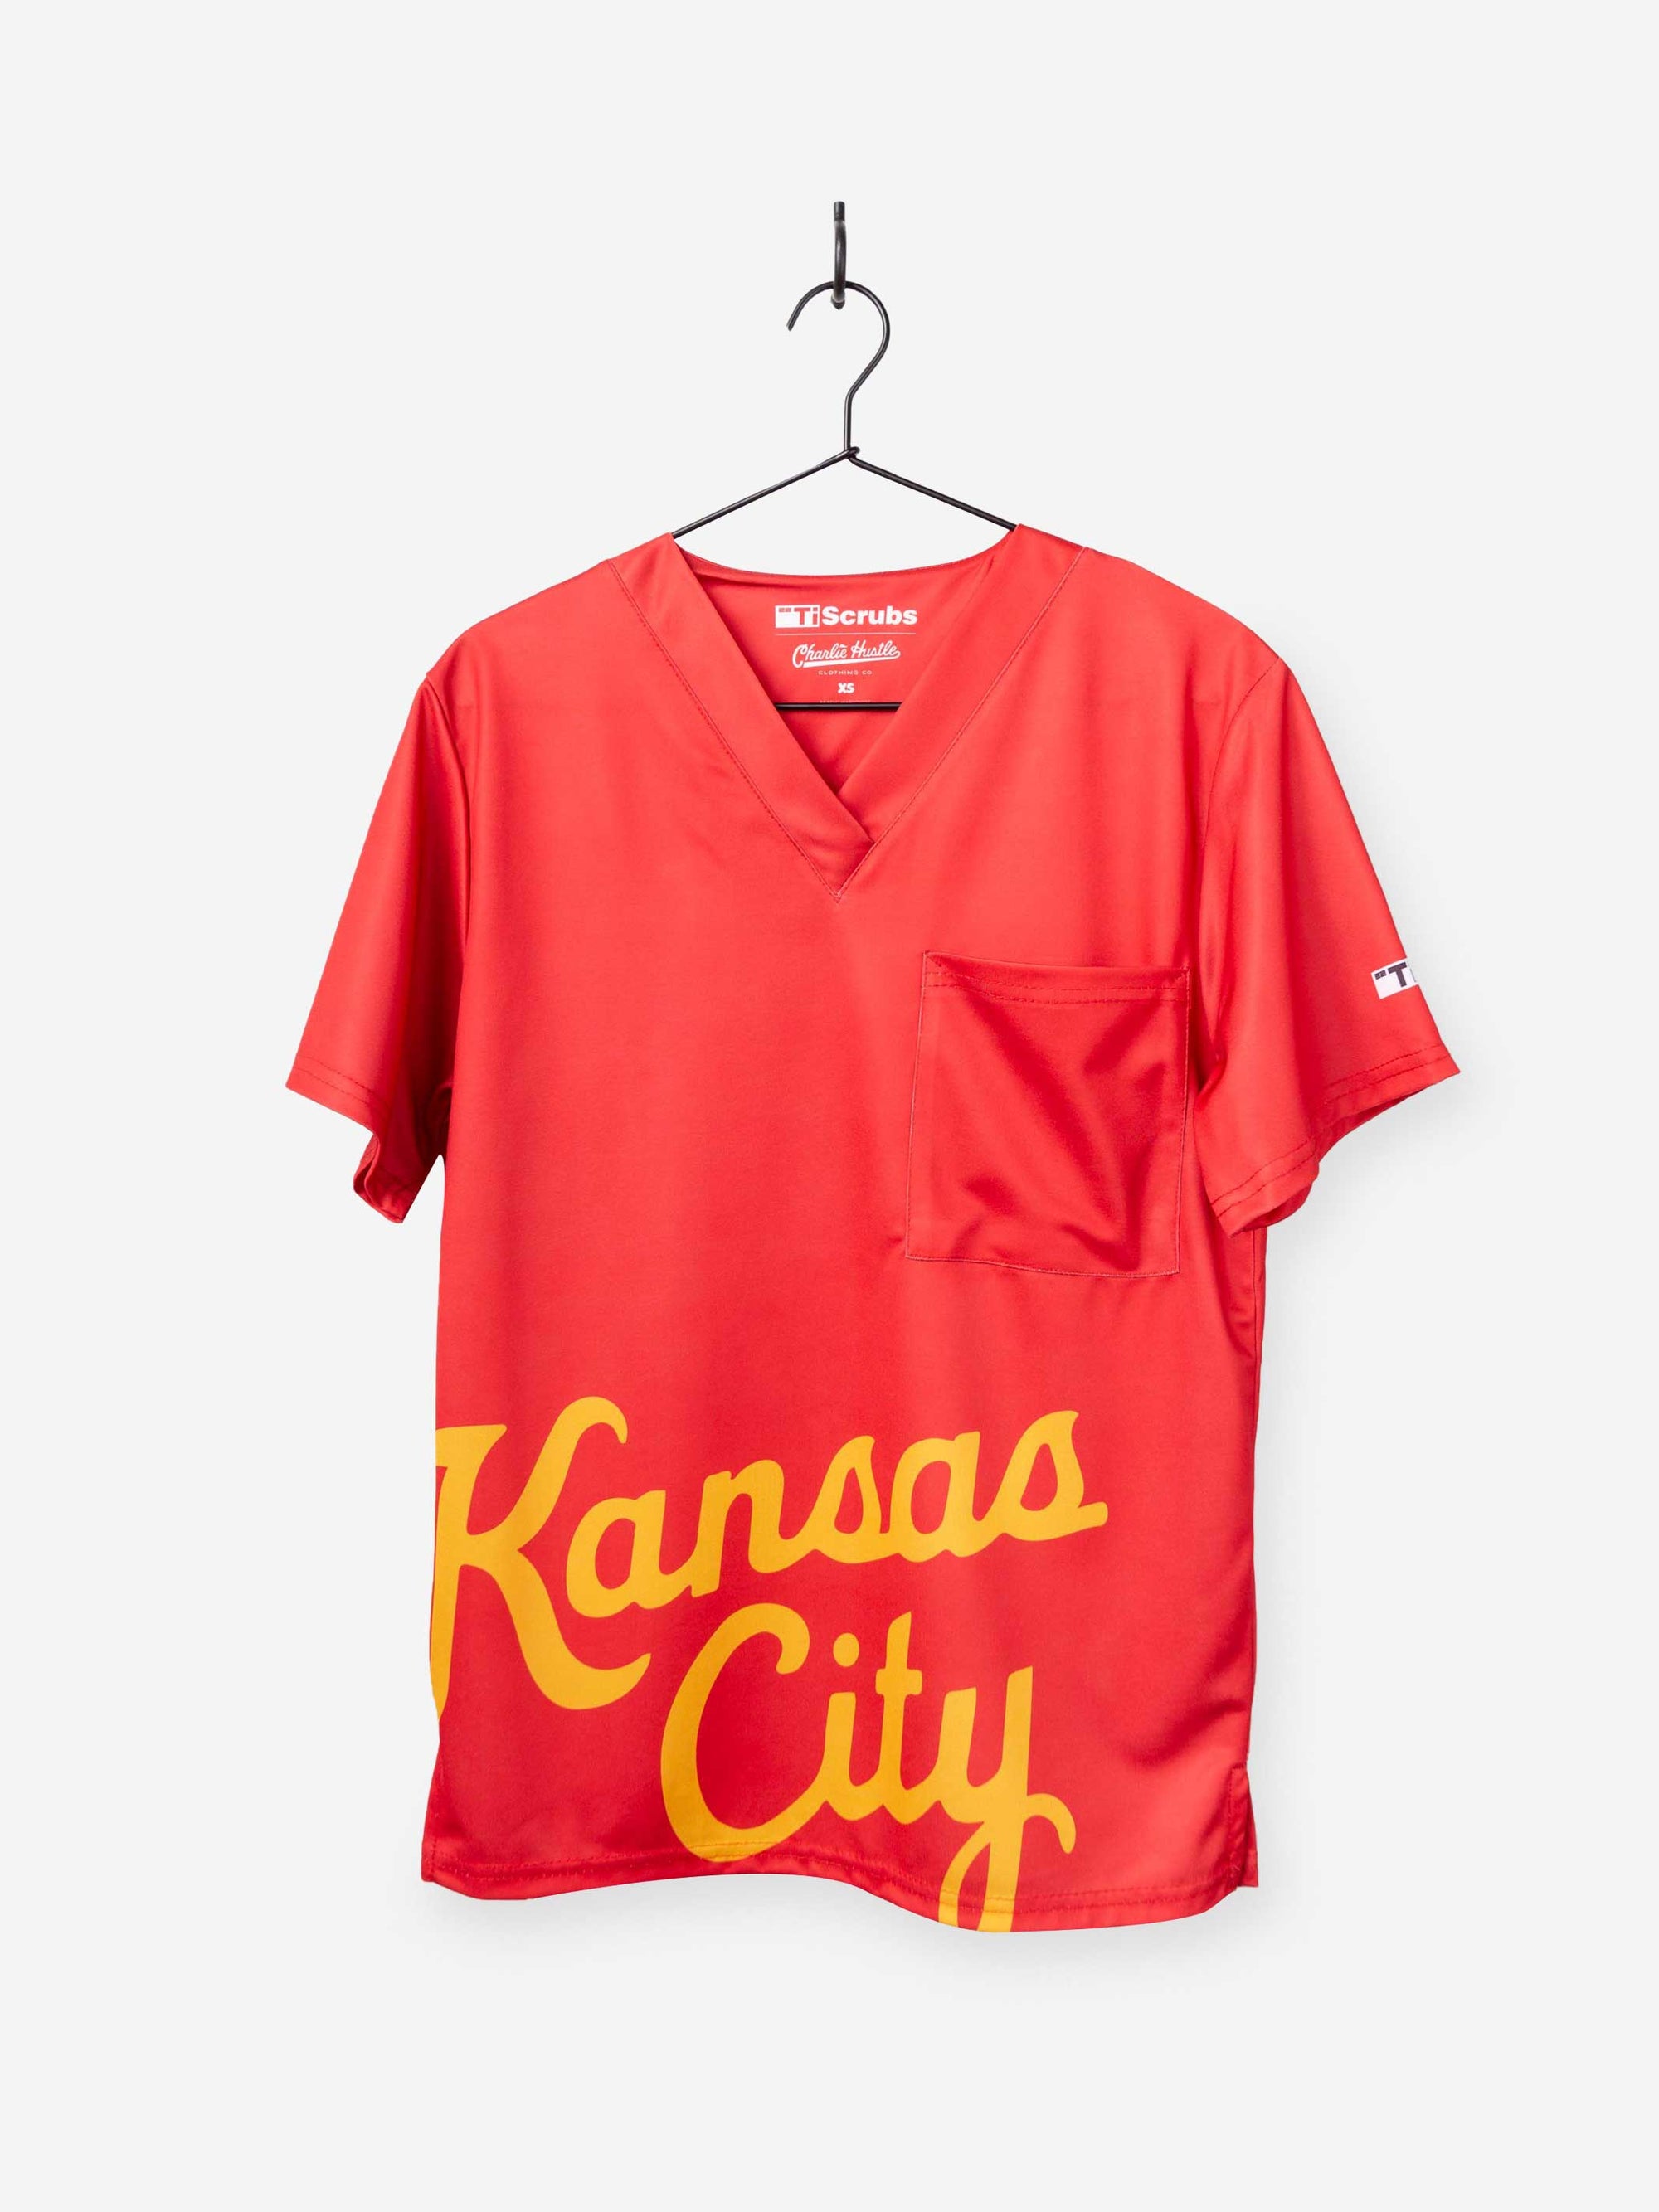 Men&#39;s Charlie Hustle Print Scrub Top with Kansas City Script in Red and Gold